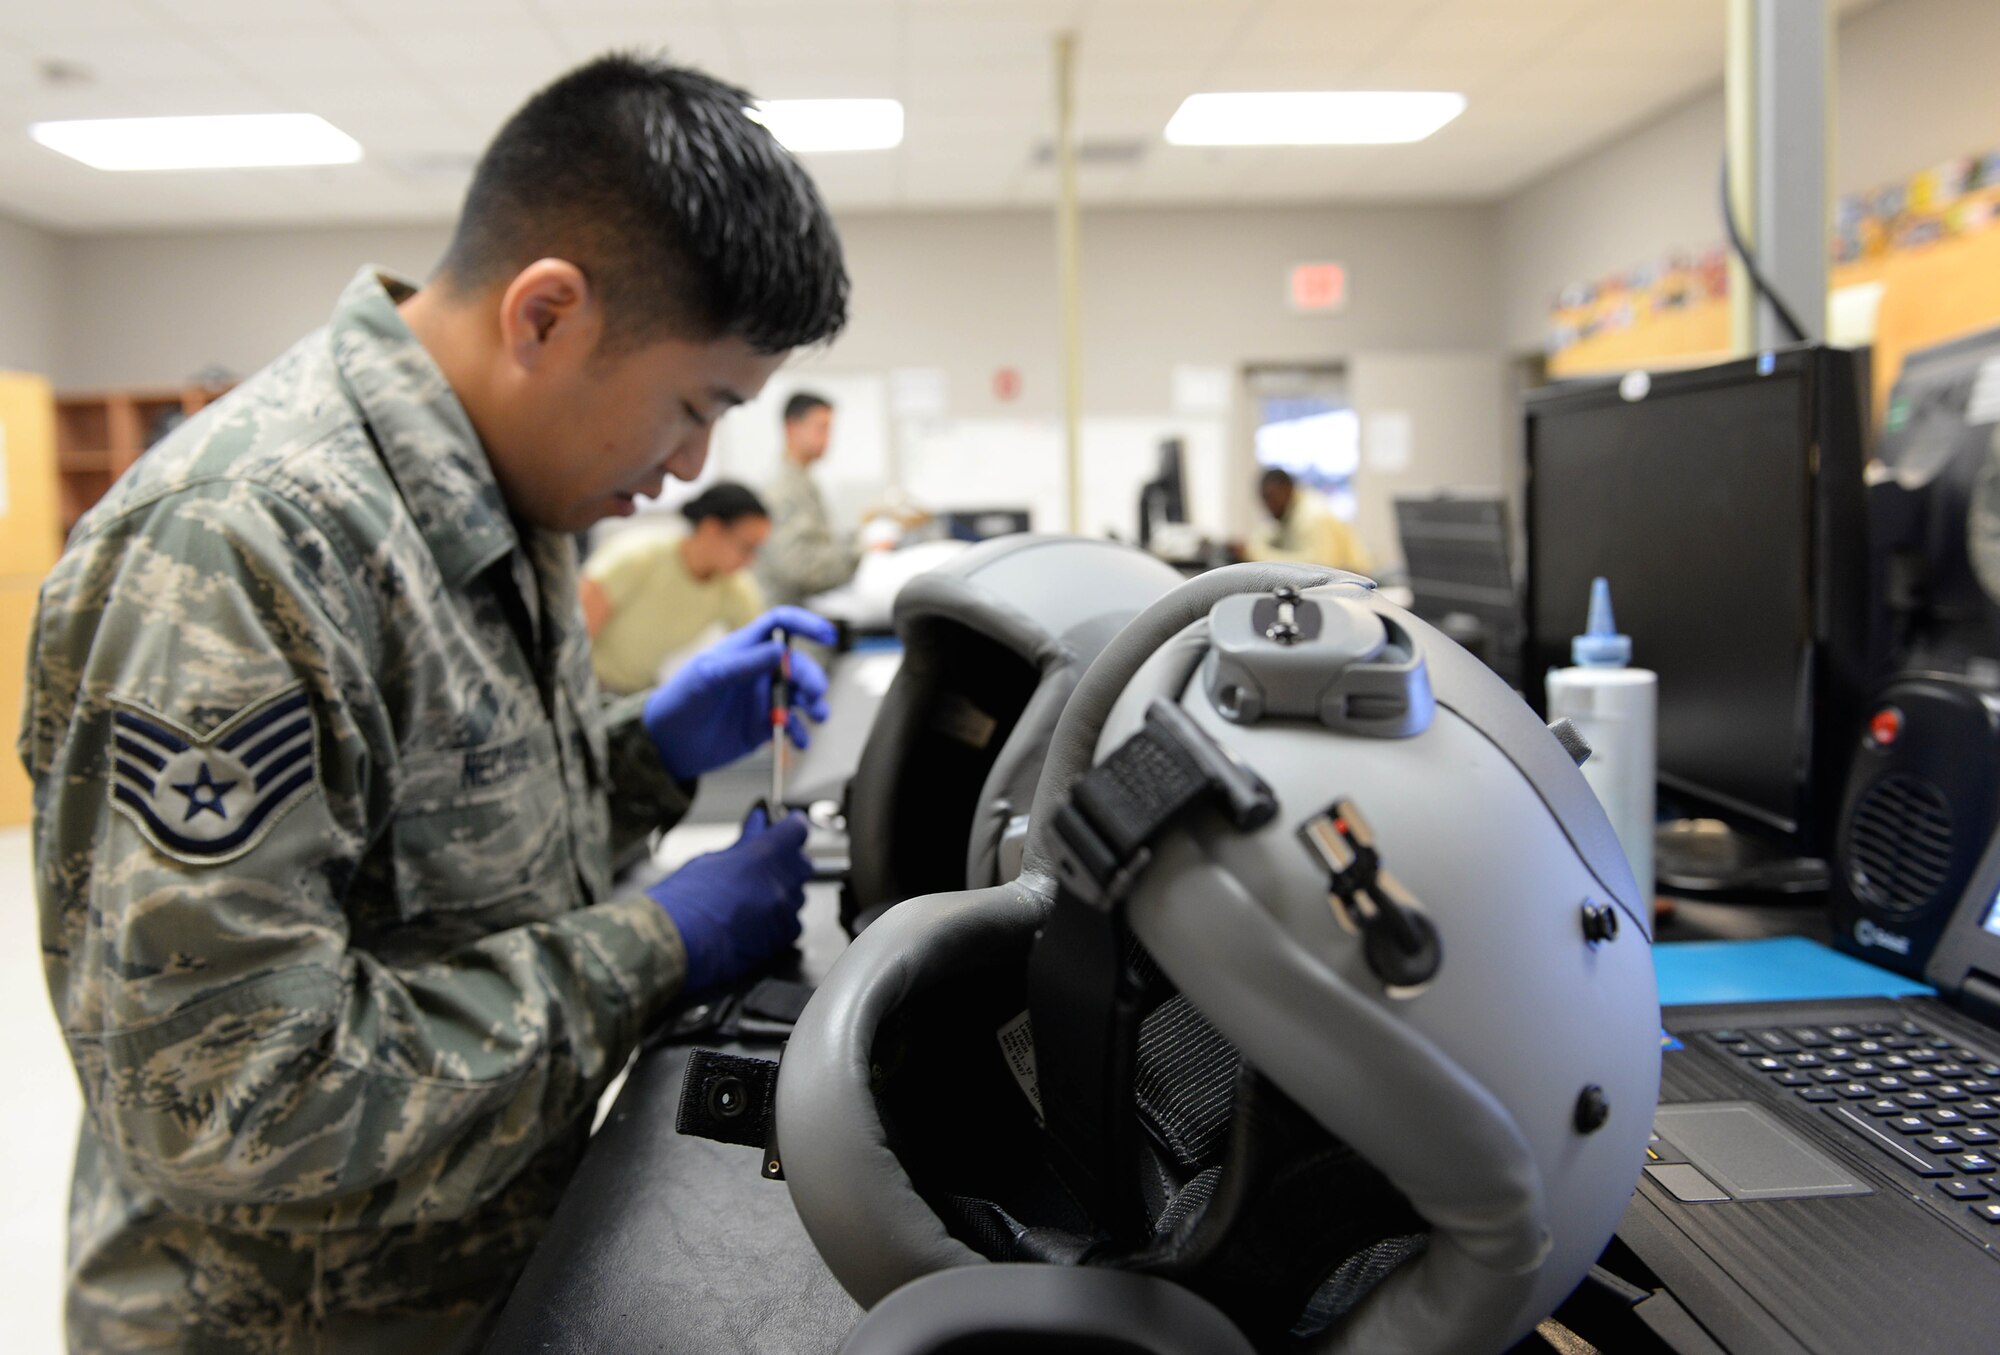 Staff Sgt. Jeremiah Necaise, 41st and 37th Flying Training Squadron Aircrew Flight Equipment technician, replaces parts on multiple helmets Dec. 5, 2017, on Columbus Air Force Base, Mississippi. Every helmet is made to fit every student individually, and the 41st and 37th FTS AFE Airmen take care of over 400 helmets. (U.S. Air Force photo by Airman 1st Class Keith Holcomb)